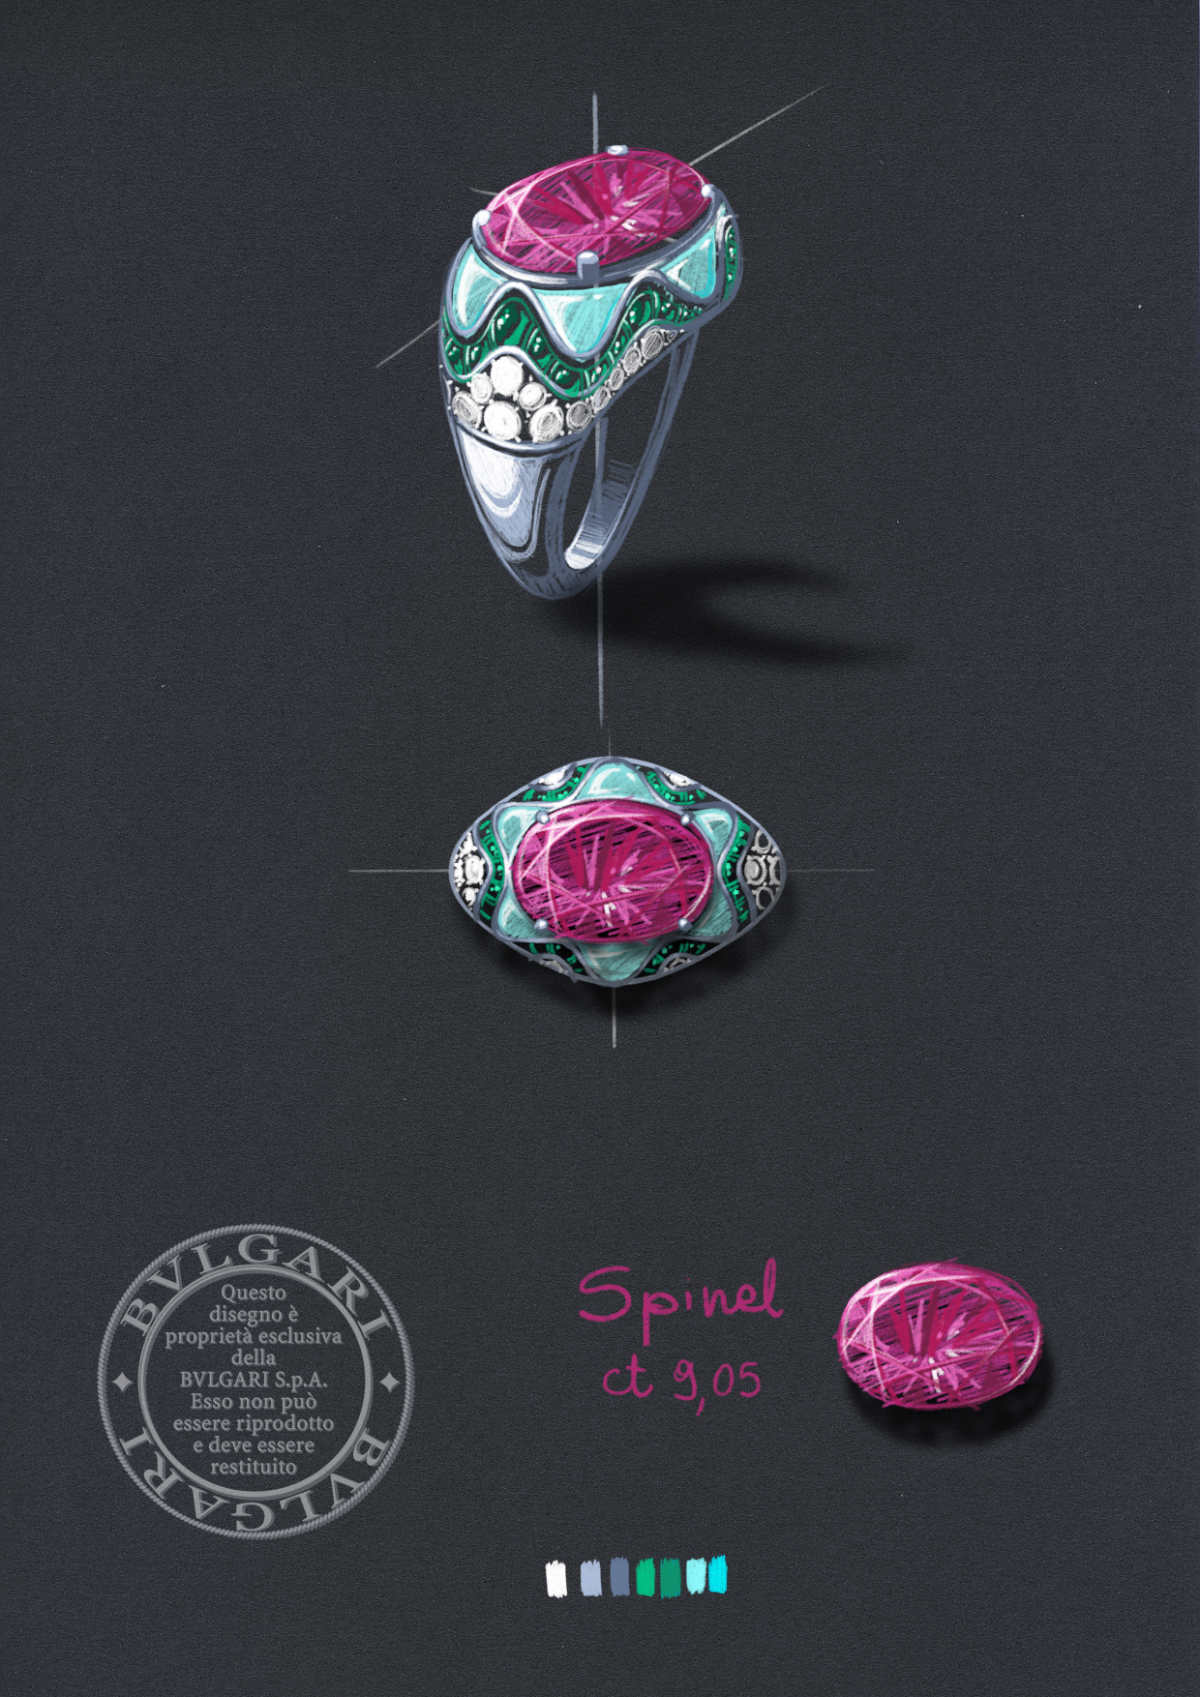 Bulgari Magnifica Collection Of High Jewelry Includes Fourth Largest Spinel  In The World